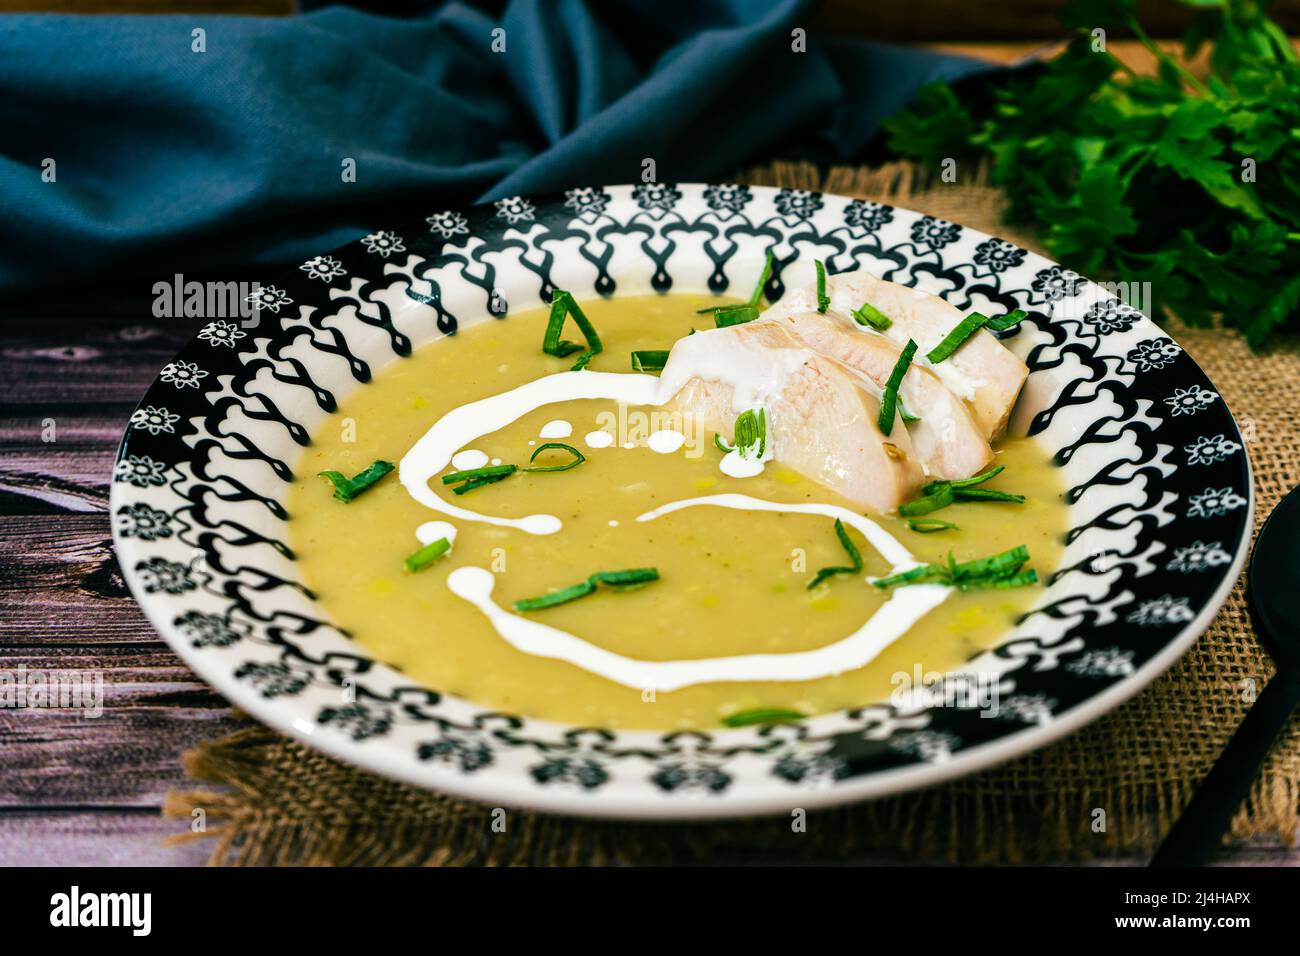 Exquisite vintage dish with a homemade cream of poultry soup in a rustic or country setting. Natural and sensible food concept. Normal View Stock Photo